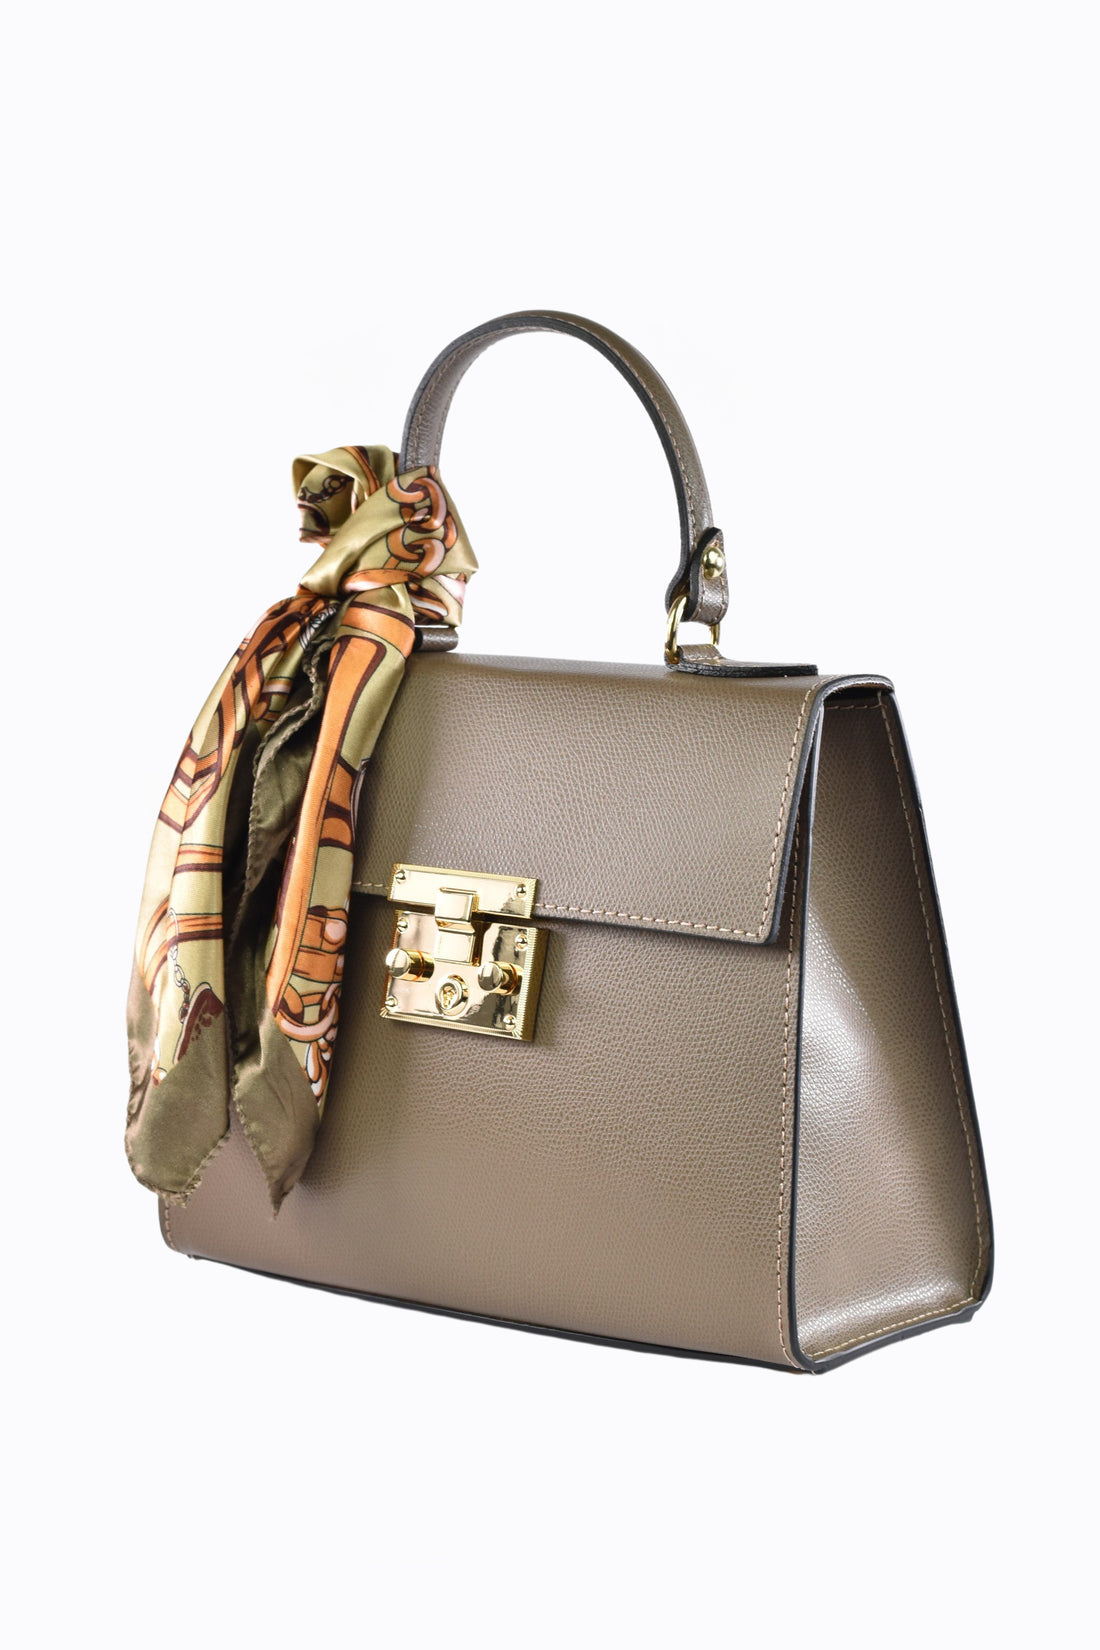 Marigold bag in Taupe saffiano leather